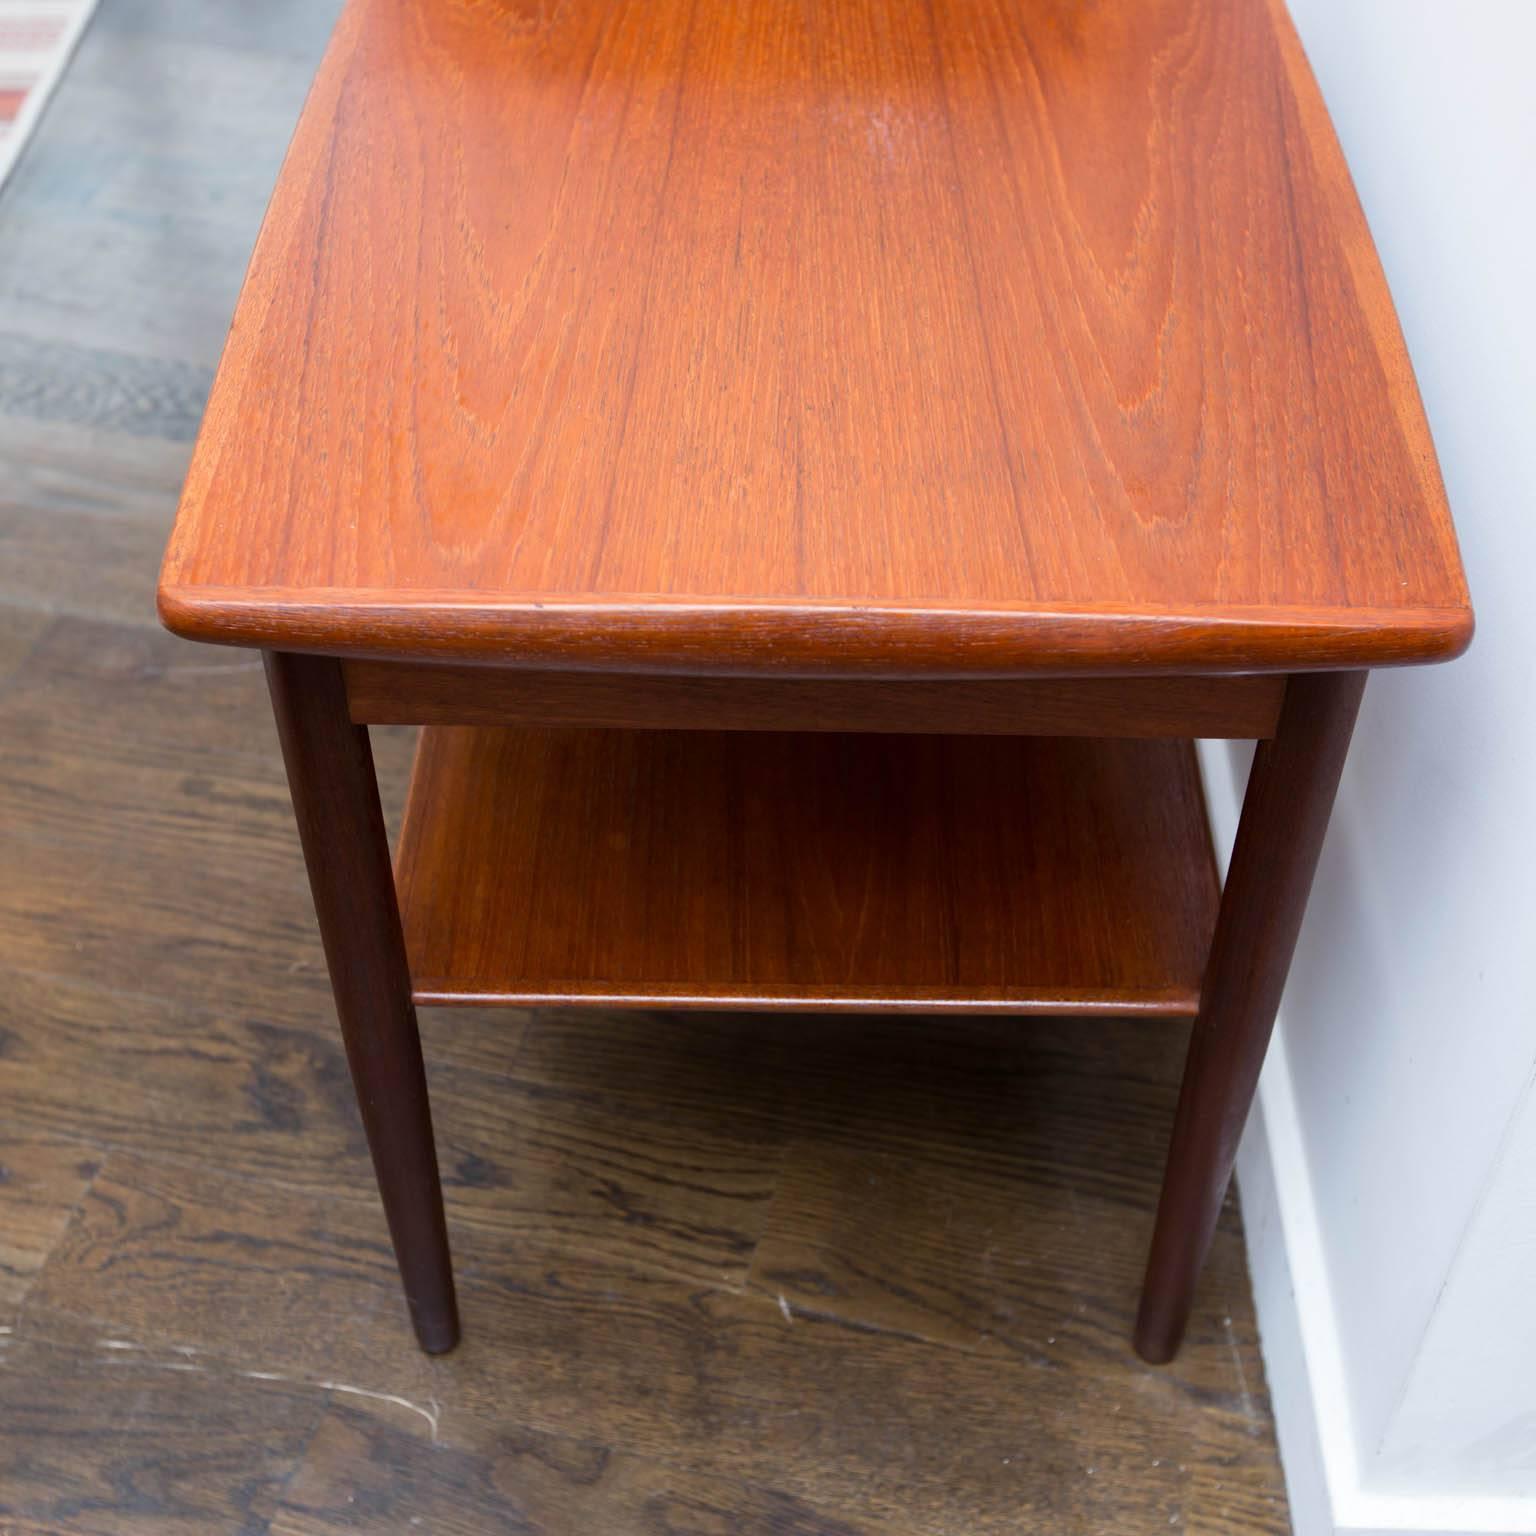 20th Century Danish Modern Poul Volther Style Teak Side Table